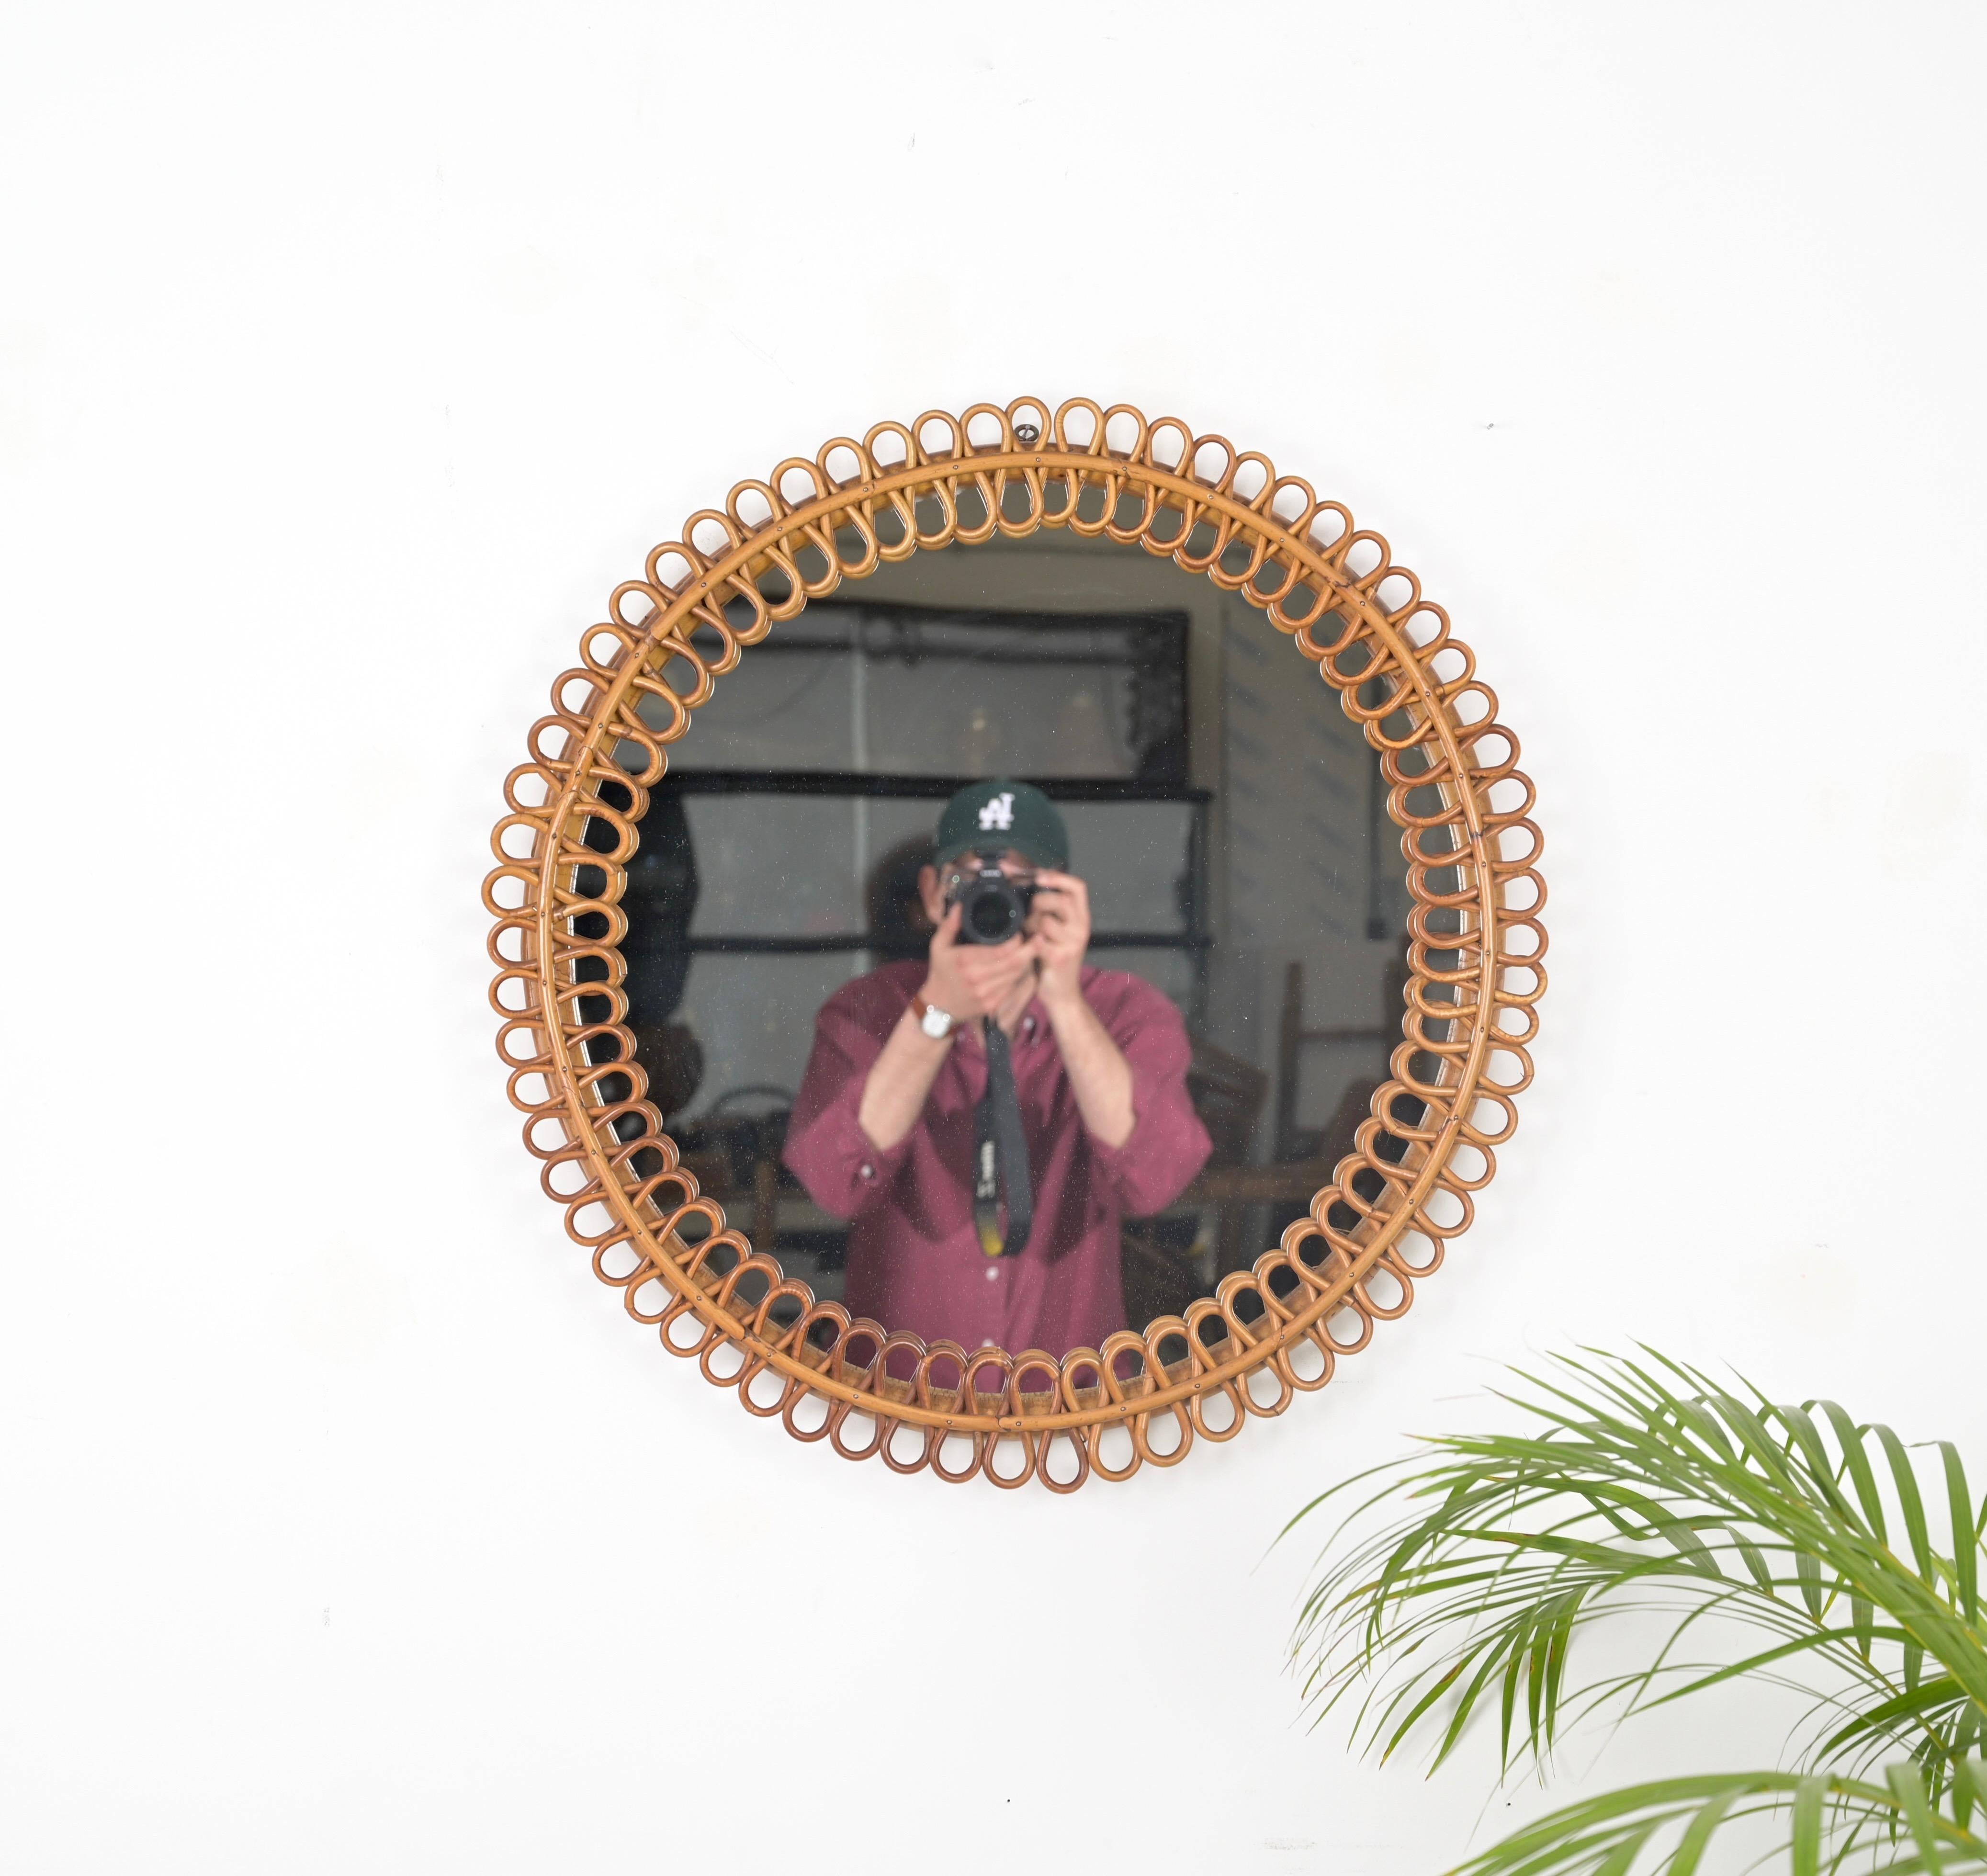 Outstanding French Riviera style round mirror fully made in curved rattan and bamboo. This spectacular and unique mirror was designed by the mastery of Franco Albini and produced in Italy during the 1960s. 

In perfect conditions and with an amazing